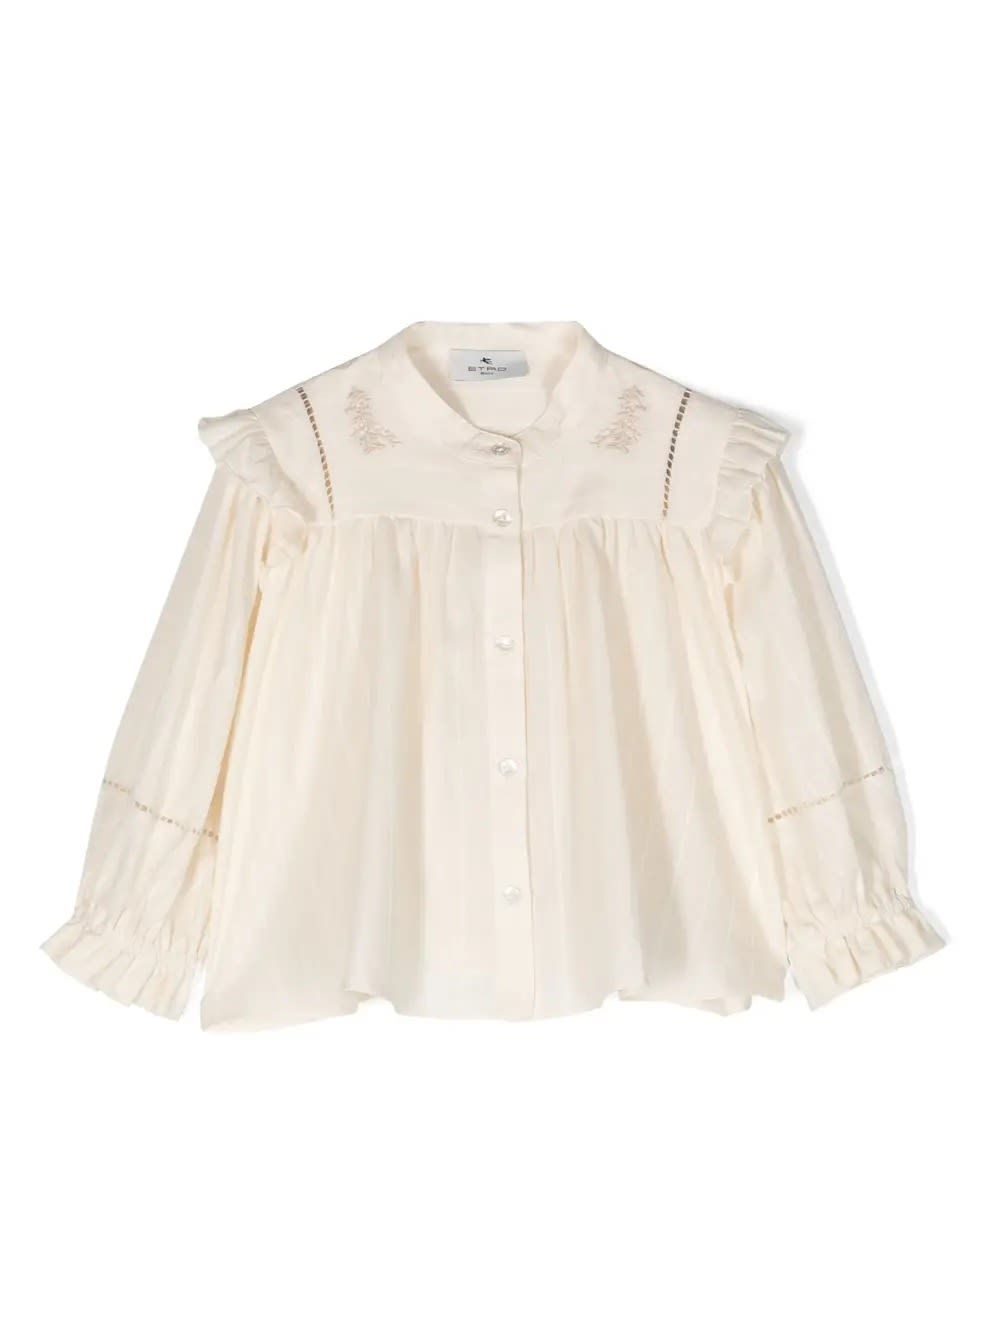 Etro Beige Pinstripe Blouse With Ruffles And Embroidery